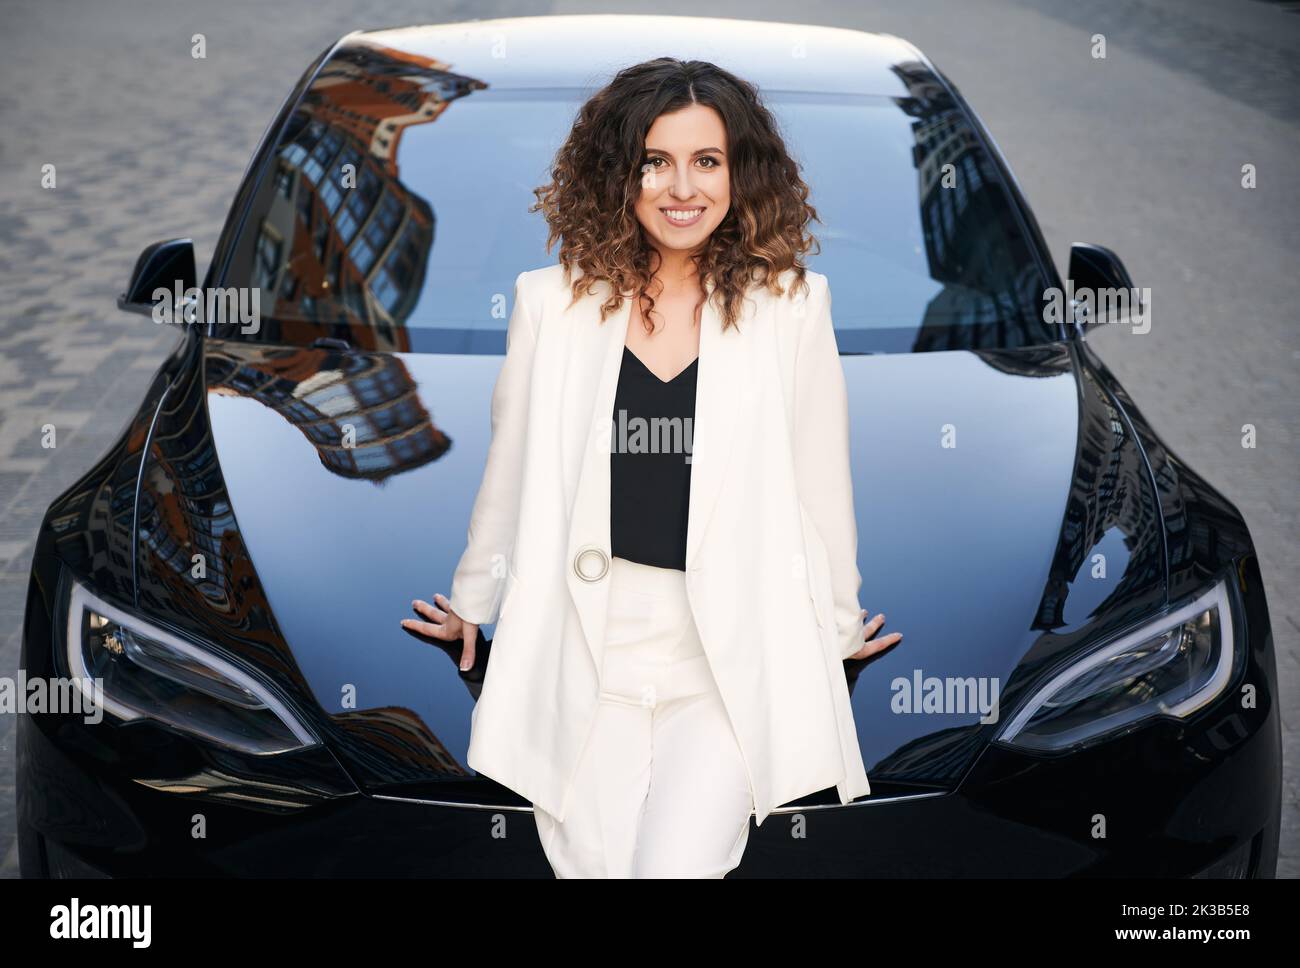 Portrait of young woman looking at camera and smiling while sitting on hood of electric car. Cheerful businesswoman in elegant white jacket posing near electric vehicle outdoors. Stock Photo